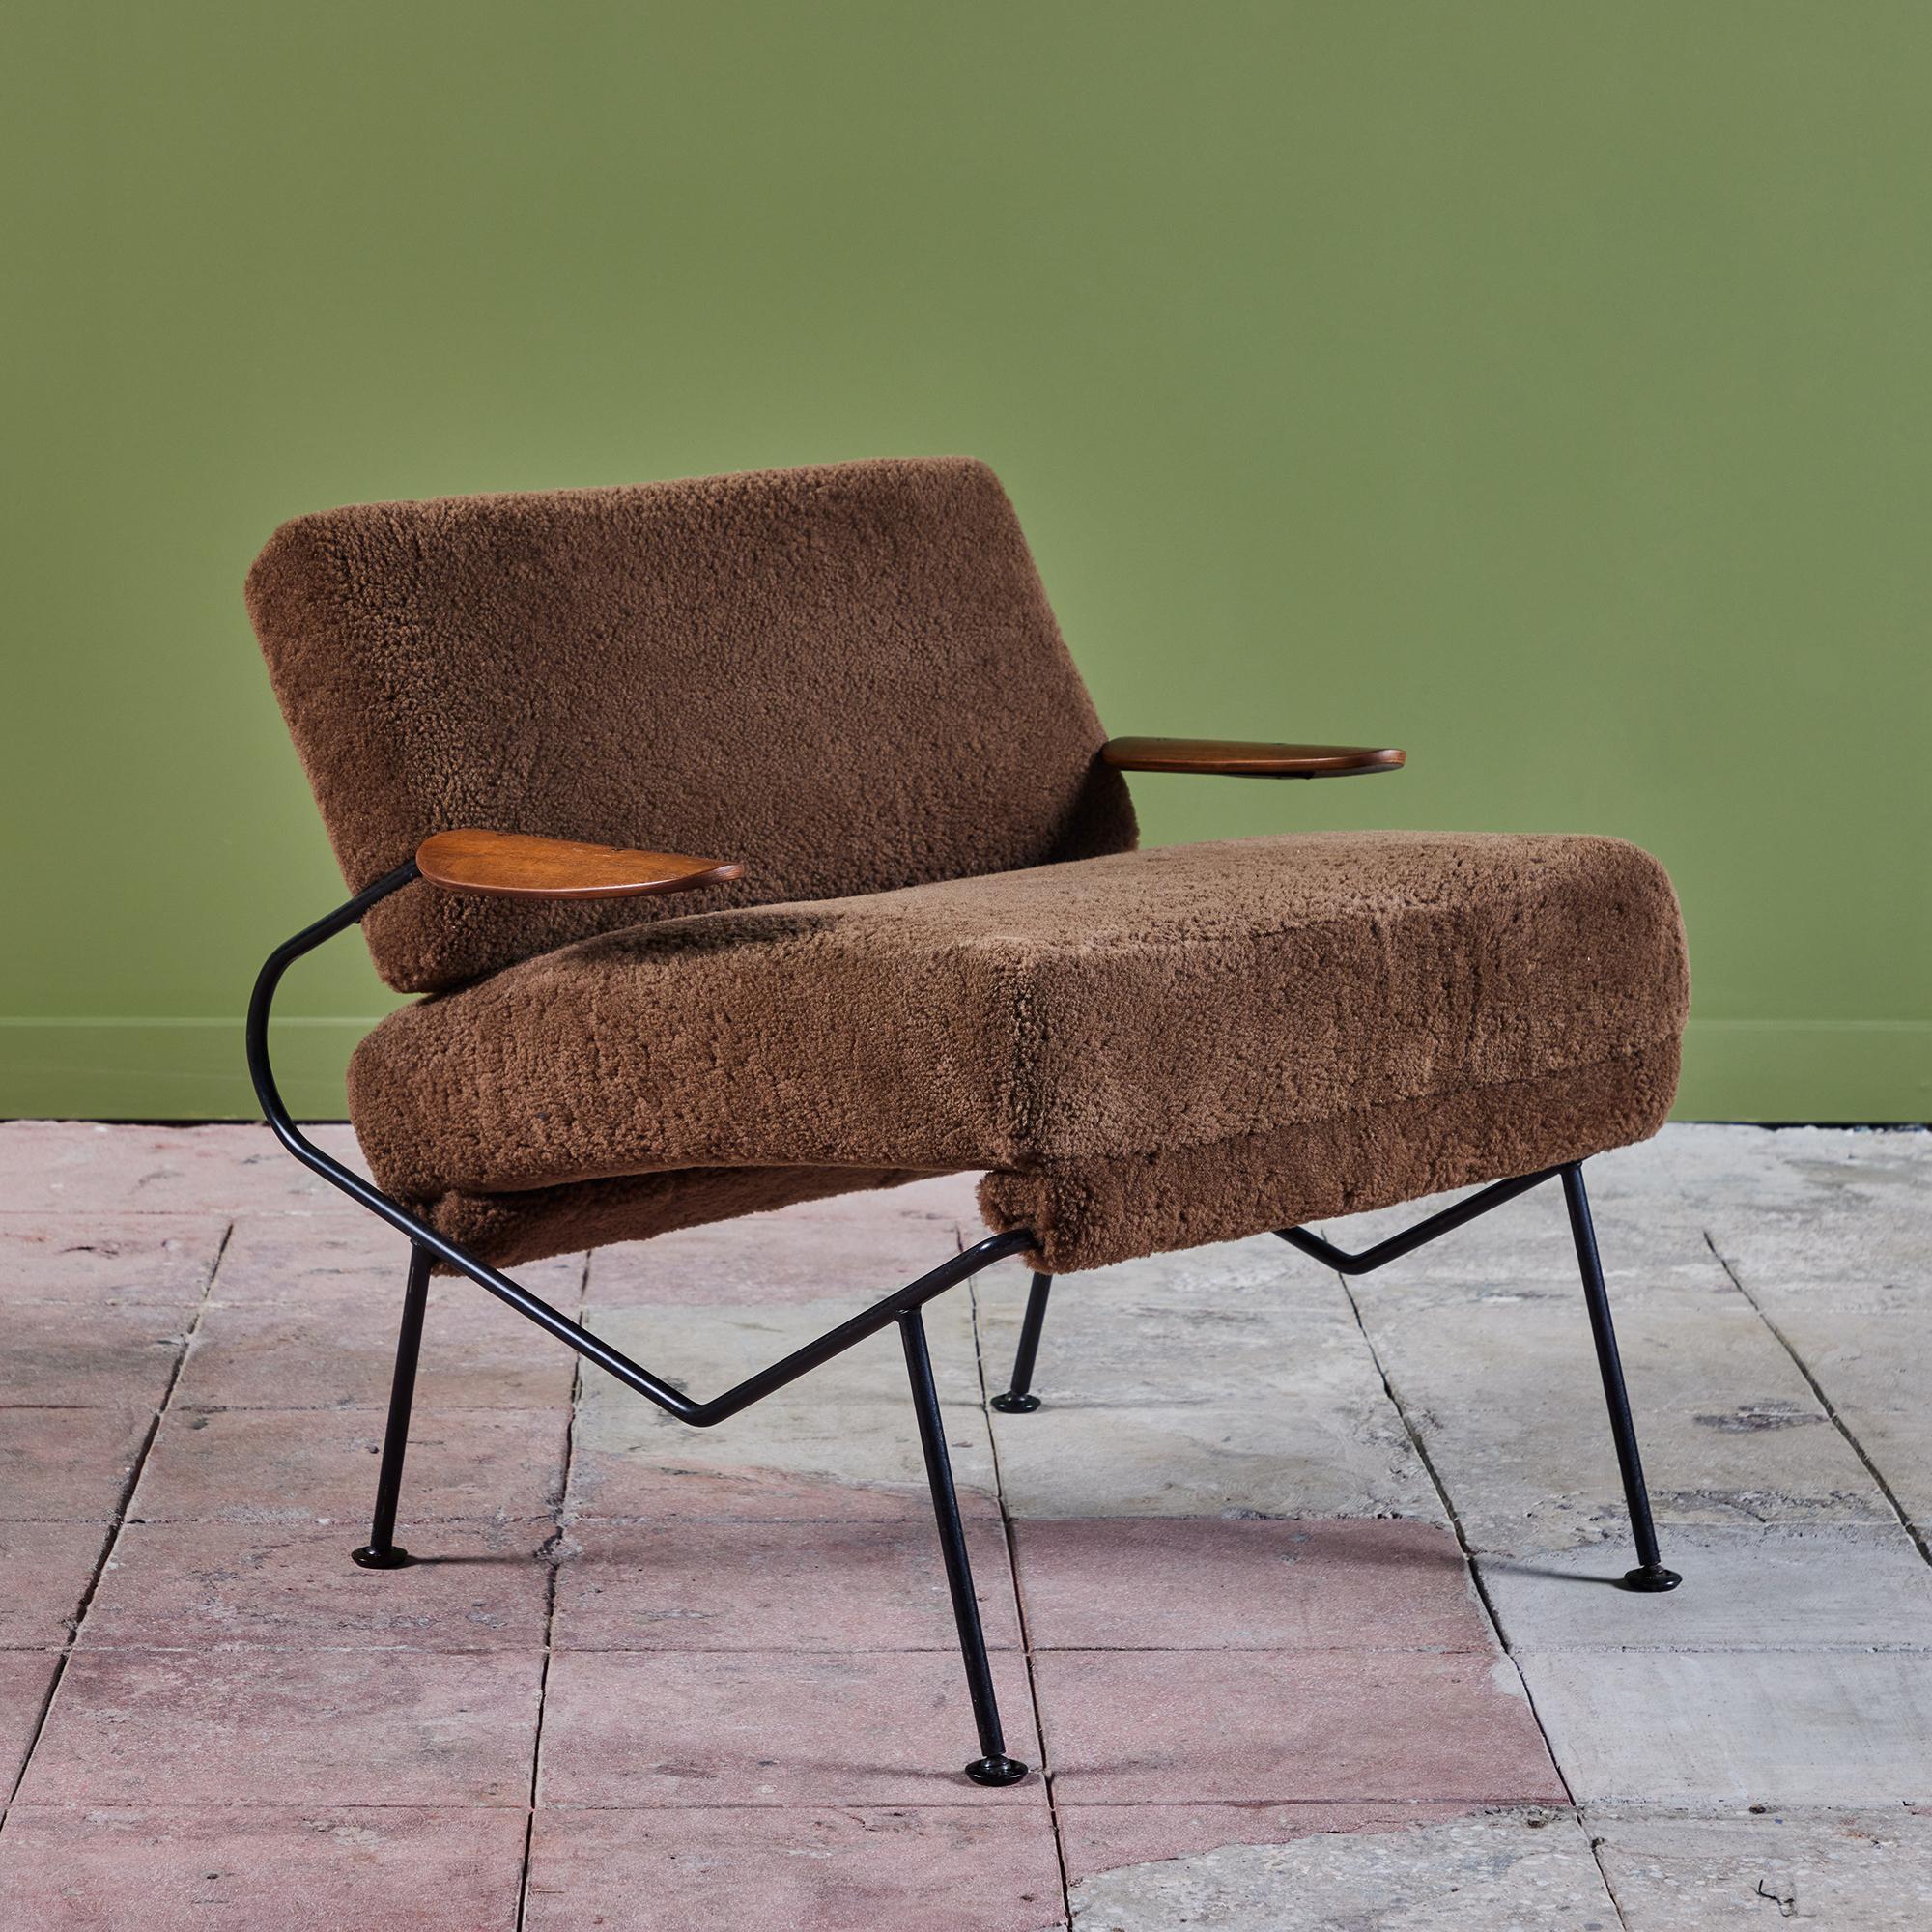 Lounge chair designed by California-based designer Dan Johnson and produced in the mid-1950s by Selig. The lightweight wire frame has a square seat- and back cushion and angled legs. Each arm has a petal-shaped armrest of molded